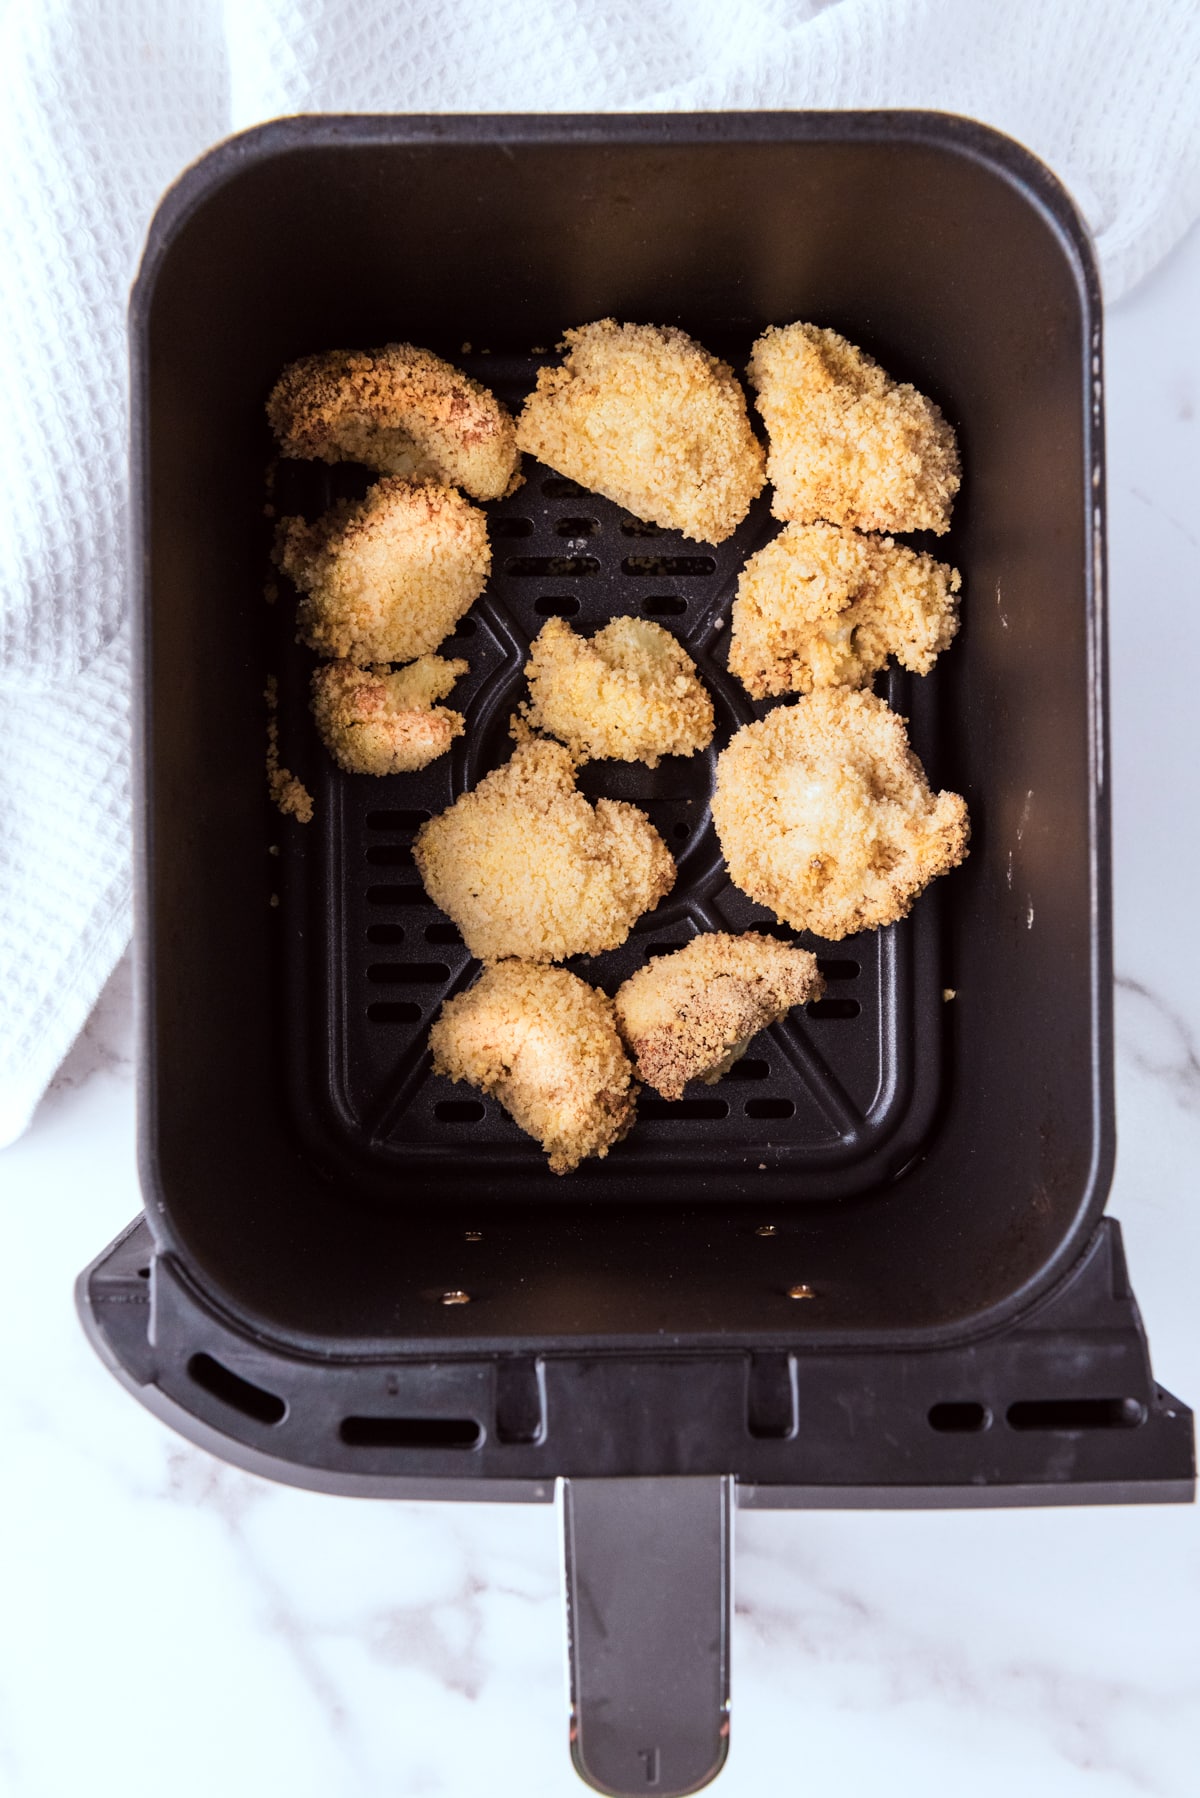 Breaded cauliflower florets in an air fryer basket on top of a marble surface with a white napkin.